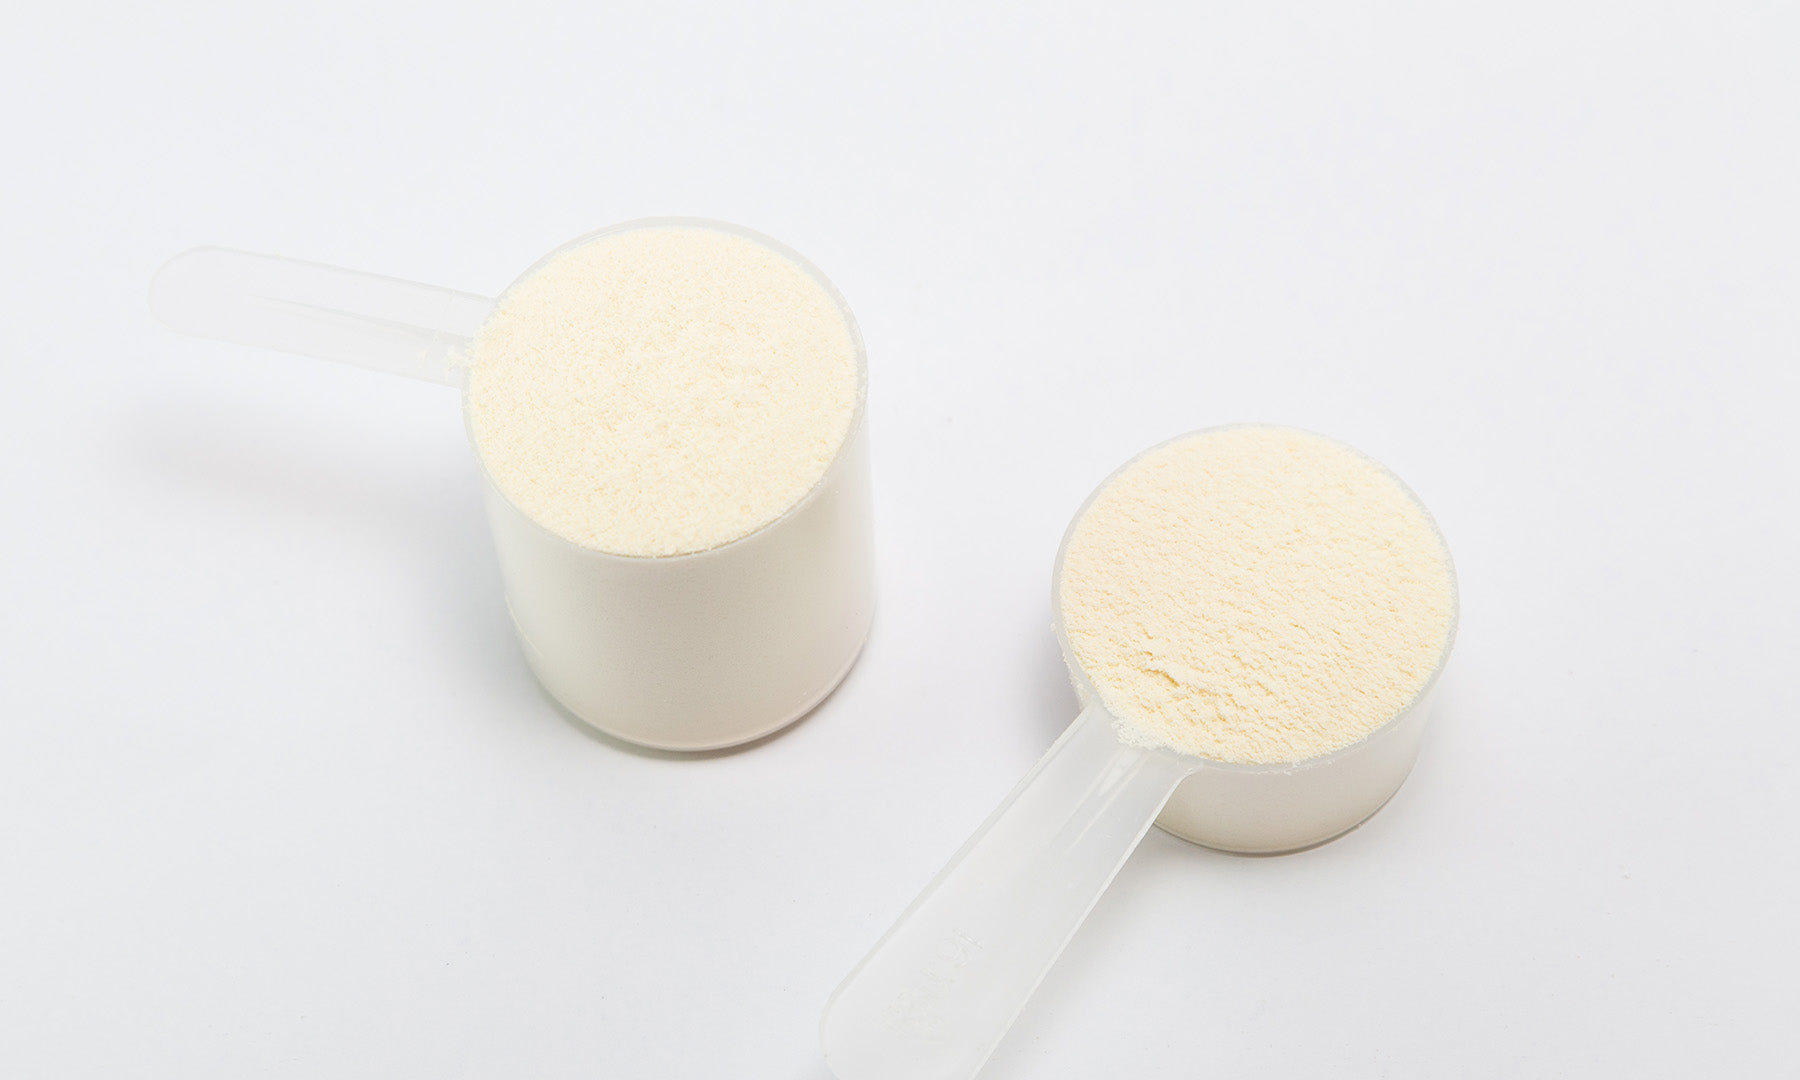 Whey protein isolate vs. whey protein concentrate powders